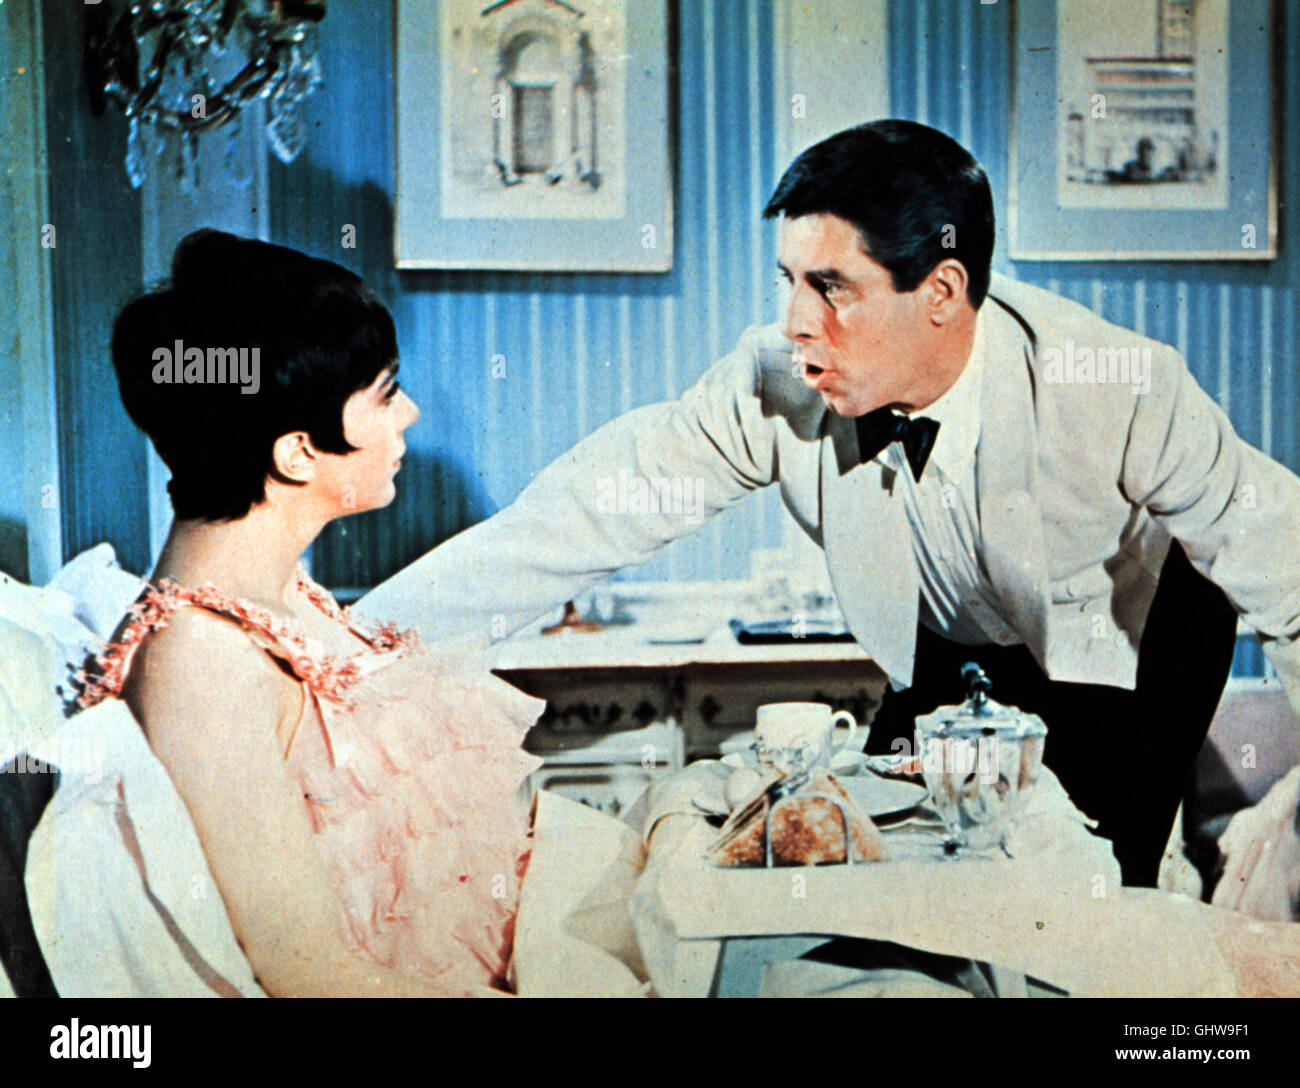 Jerry Lewis Film In Dont Raise Bridge High Resolution Stock Photography and  Images - Alamy